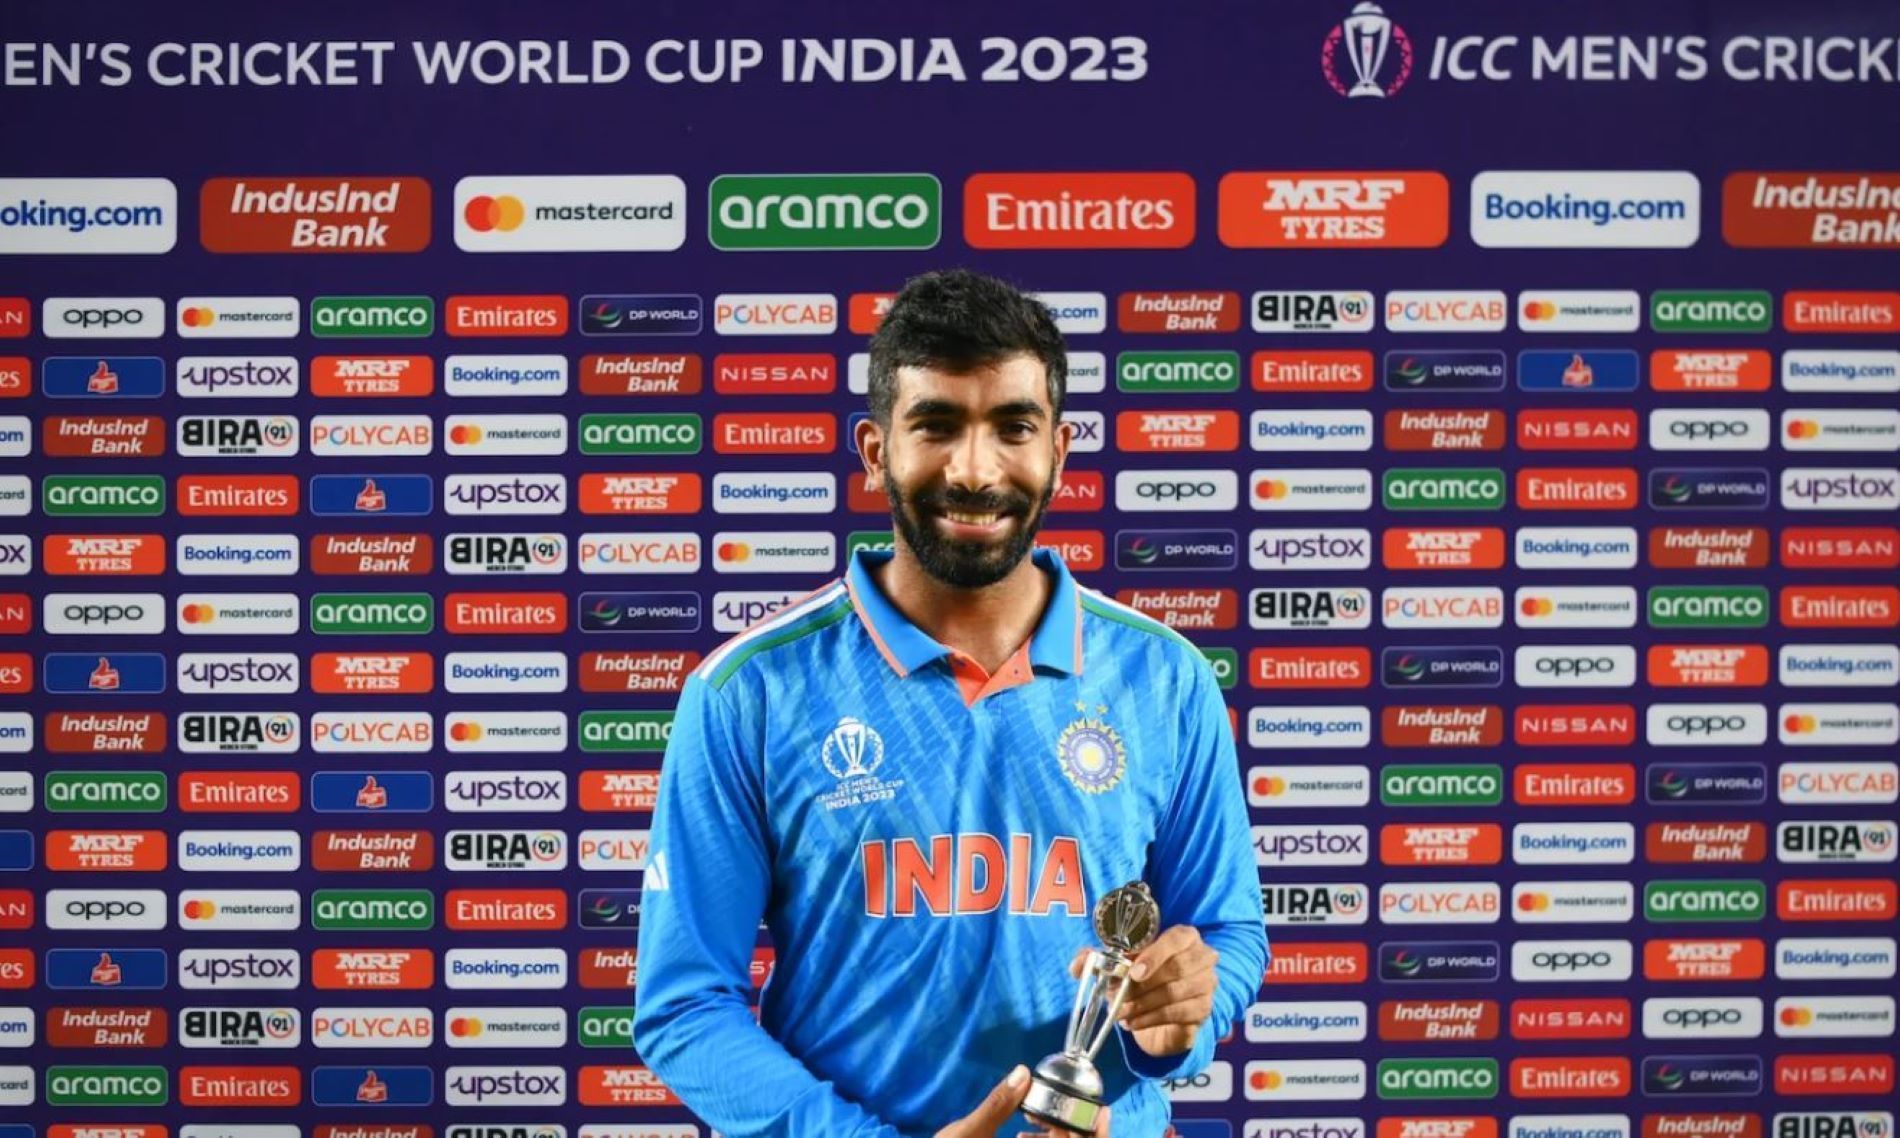 Bumrah delivered another match-winning performance against the arch-rivals